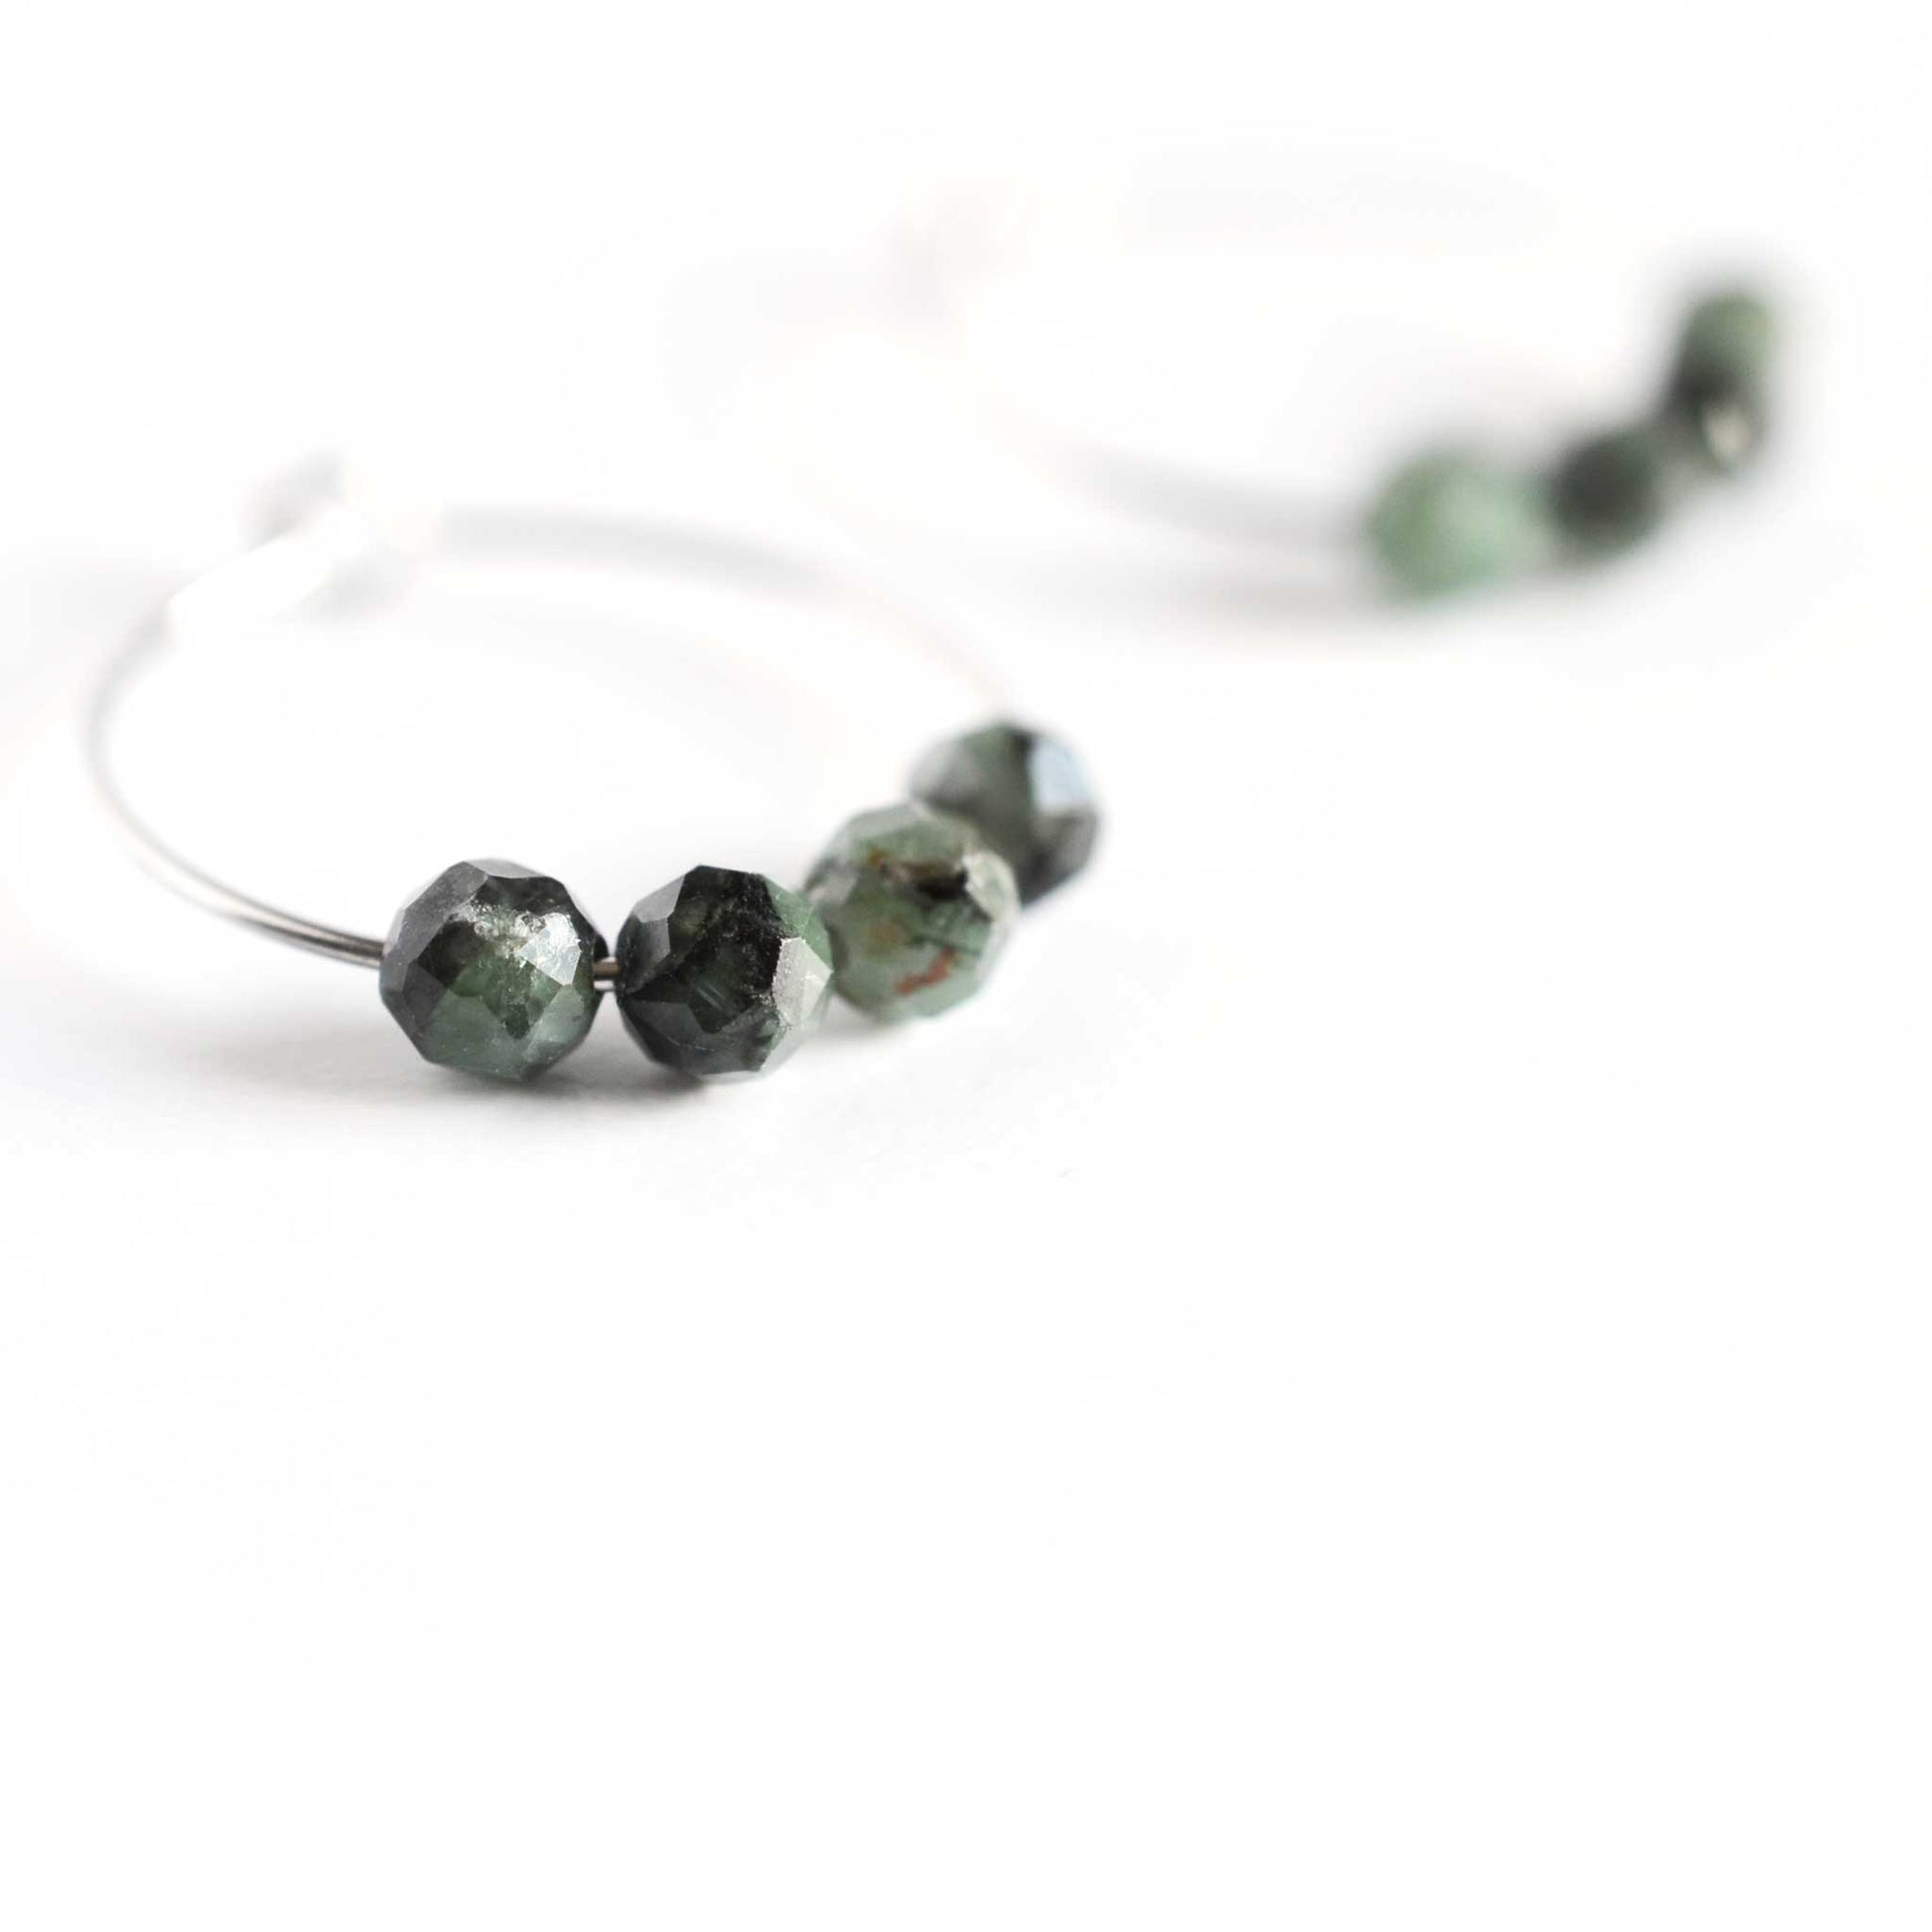 Close up of Emerald hoop earrings with four small round faceted dark green natural Emerald beads